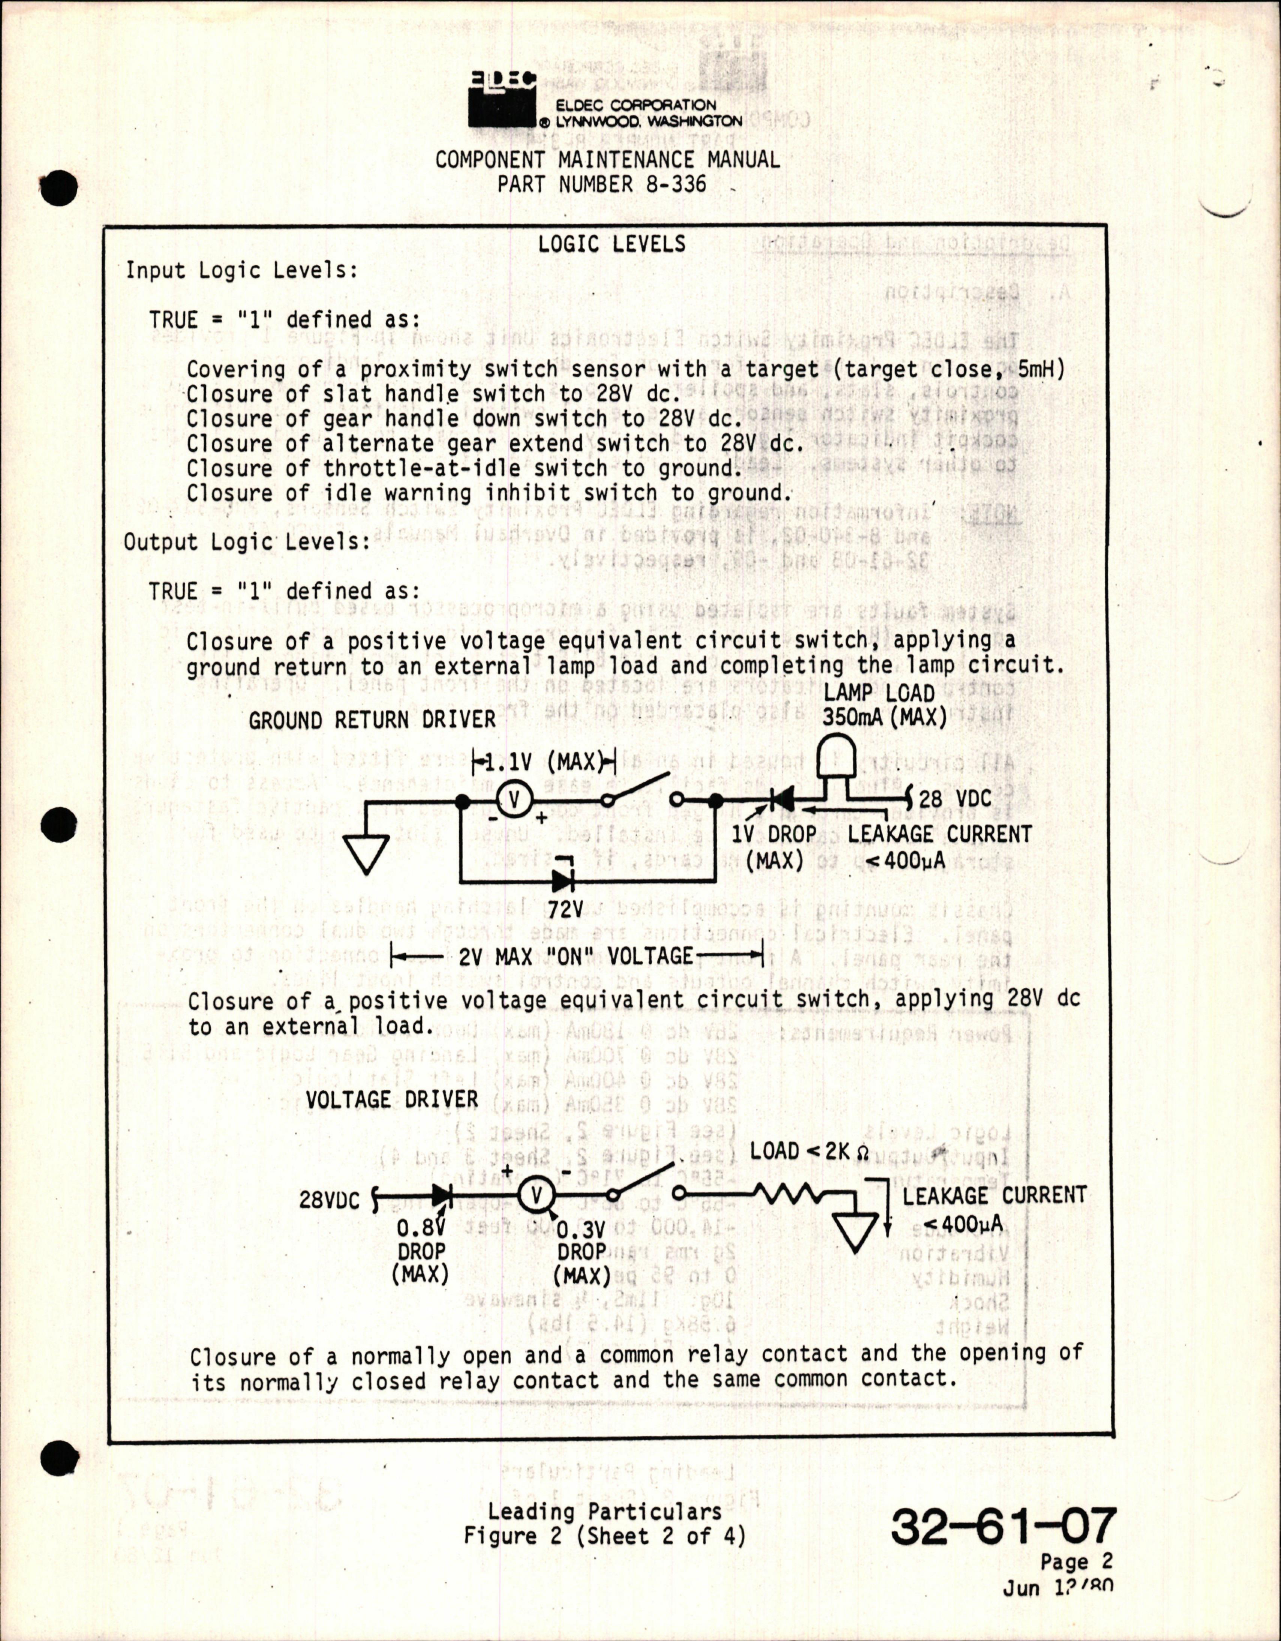 Sample page 7 from AirCorps Library document: Maintenance Manual with Illustrated Parts List for Proximity Switch Electronics Unit - Part 8-336-02